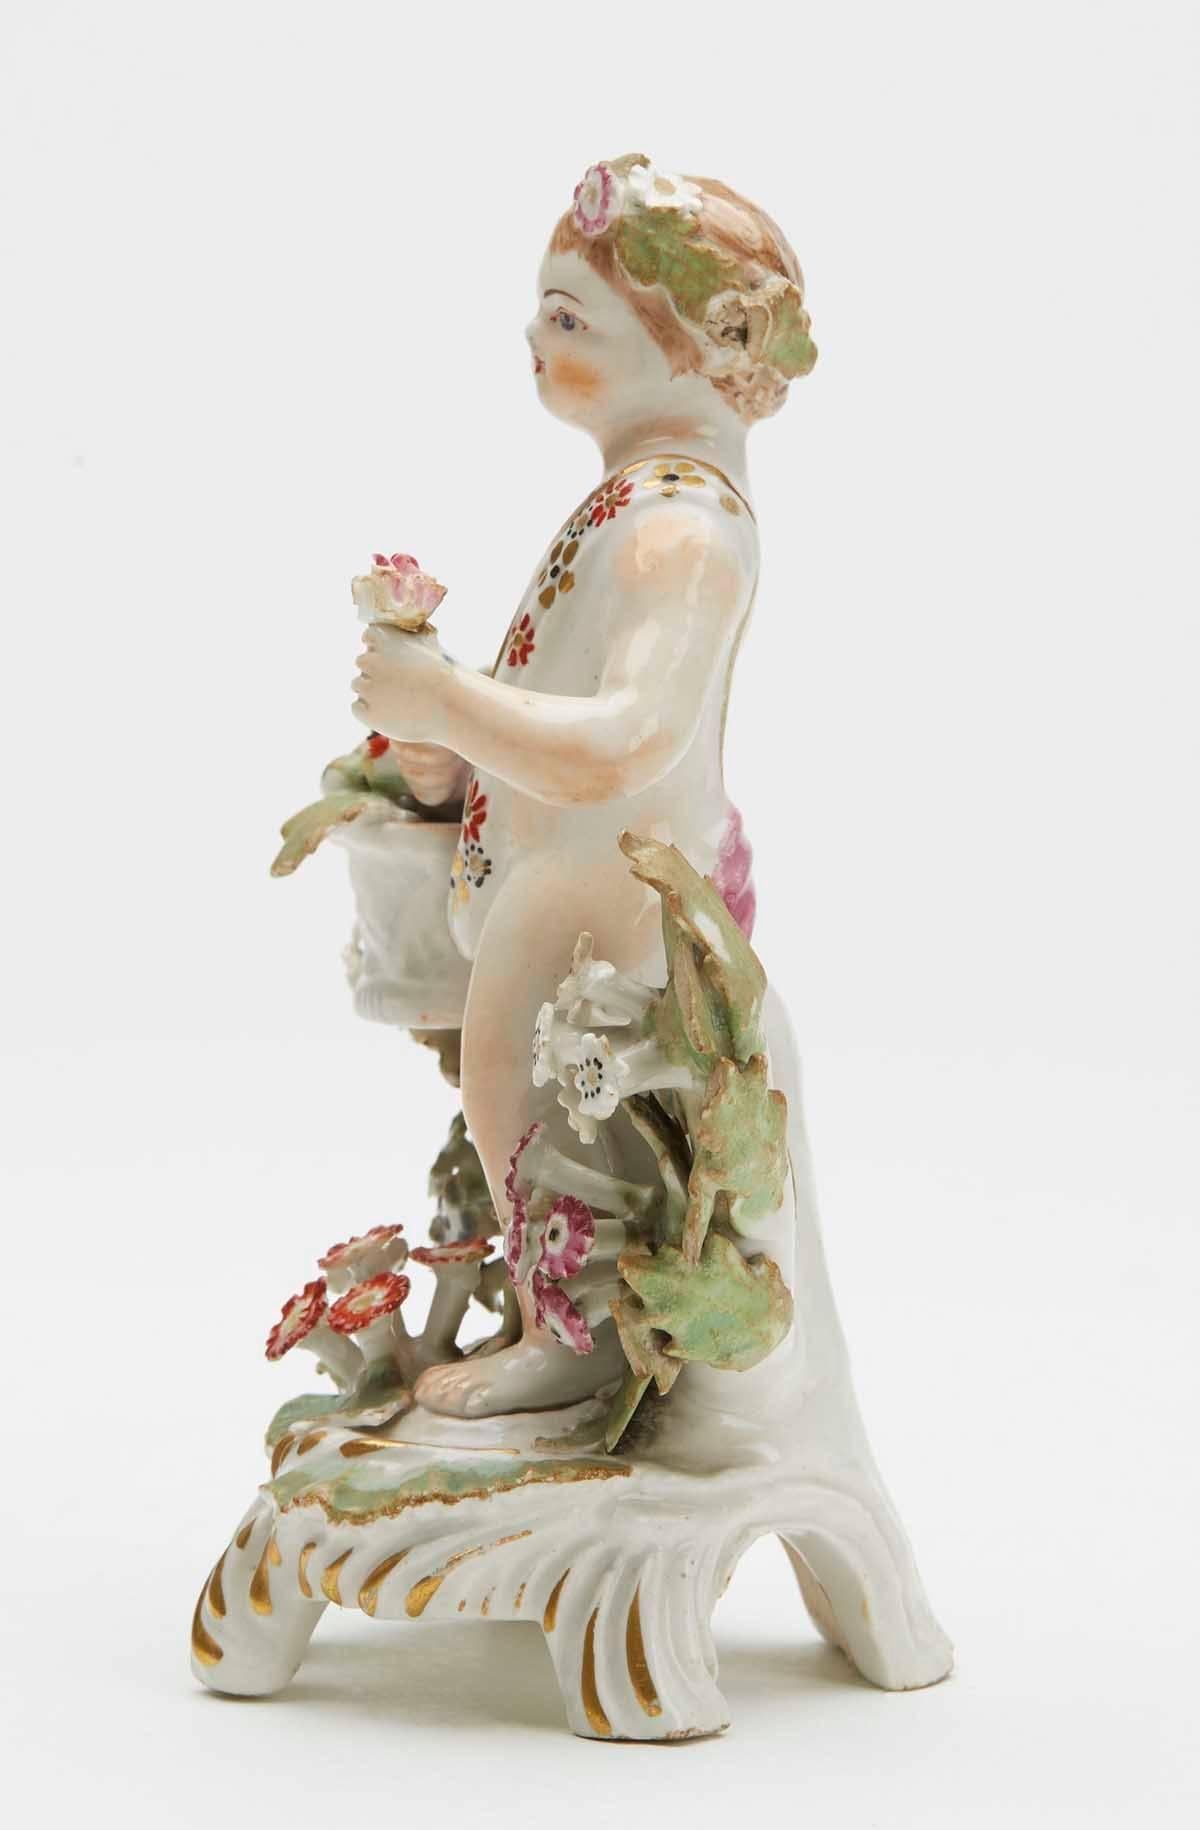 As part of a fine collection of early English porcelain, we offer this rare antique bow figure of a putti carrying a basket of fruit and dating from circa 1765. The figure stands raised on a scroll work base heightened with gilding and stands